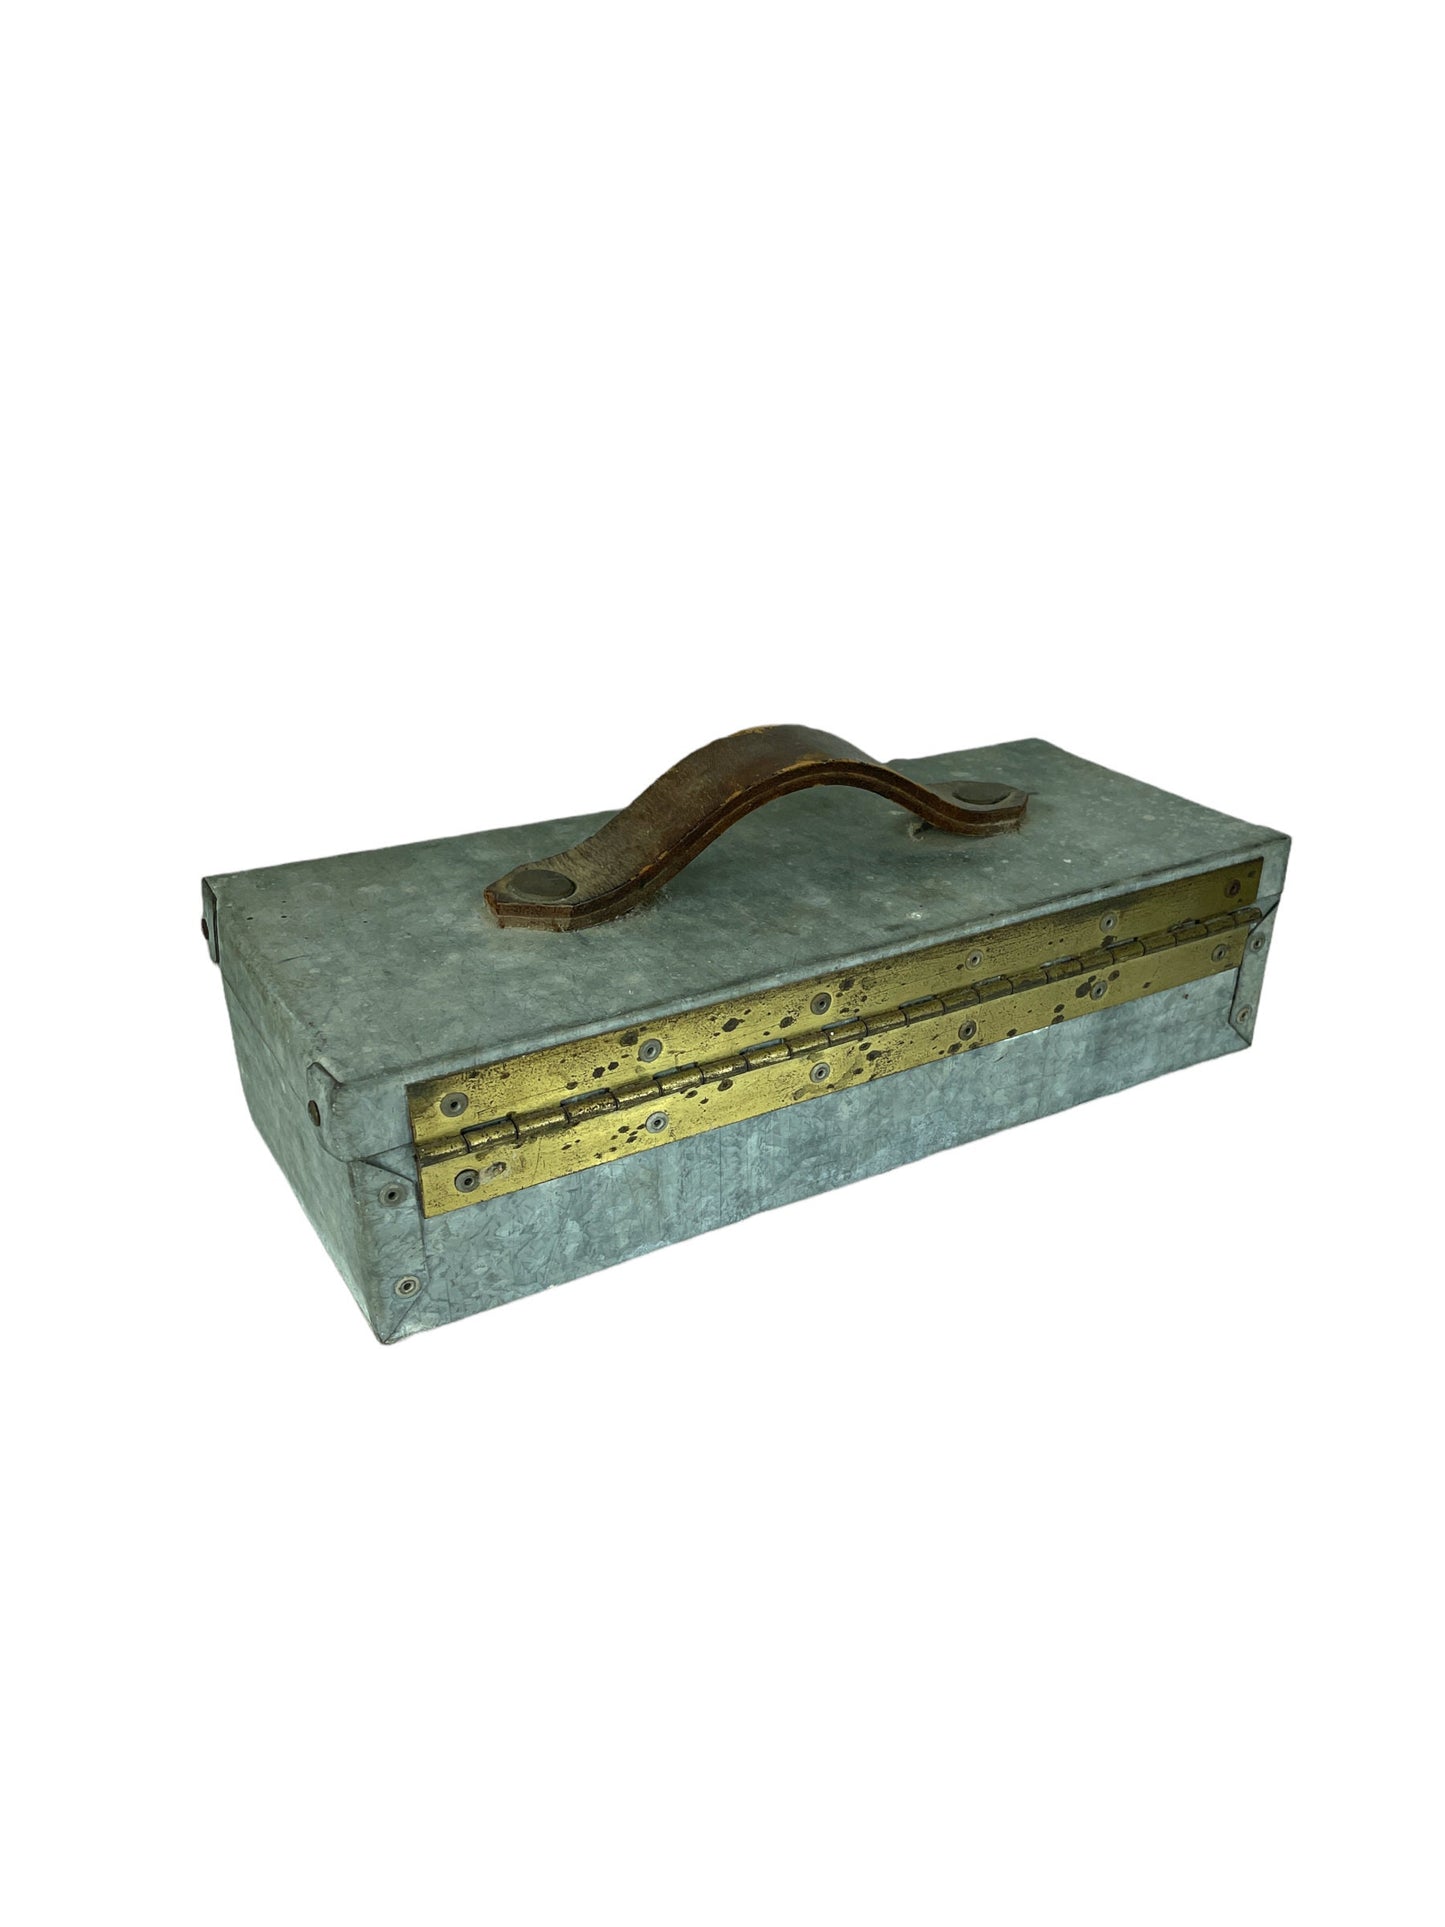 1920s 30s steel tool storage box with leather handle